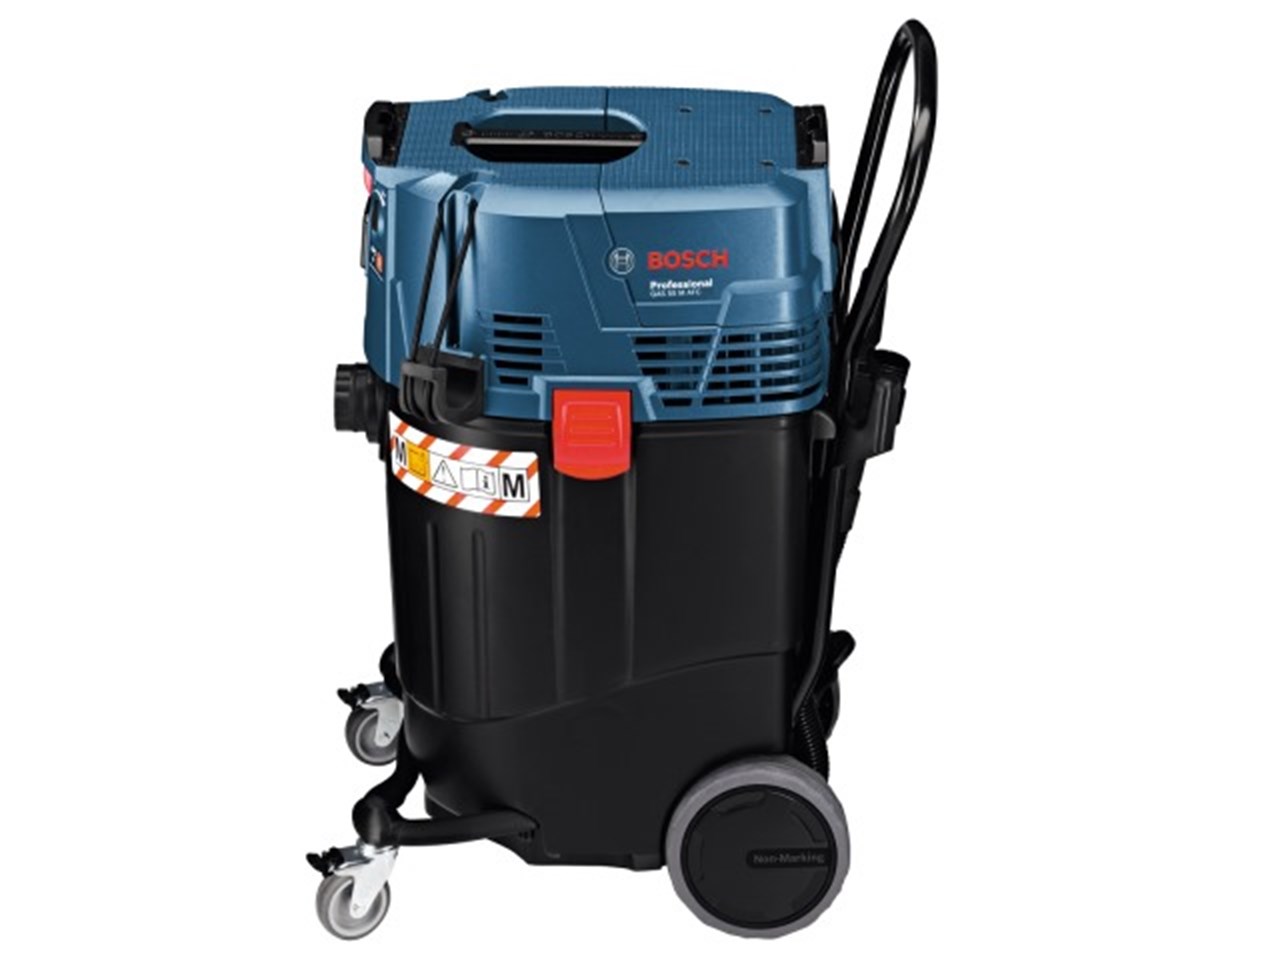  GAS 55 M AFC 240v 1200W 55L Wet+Dry Extractor Vacuum